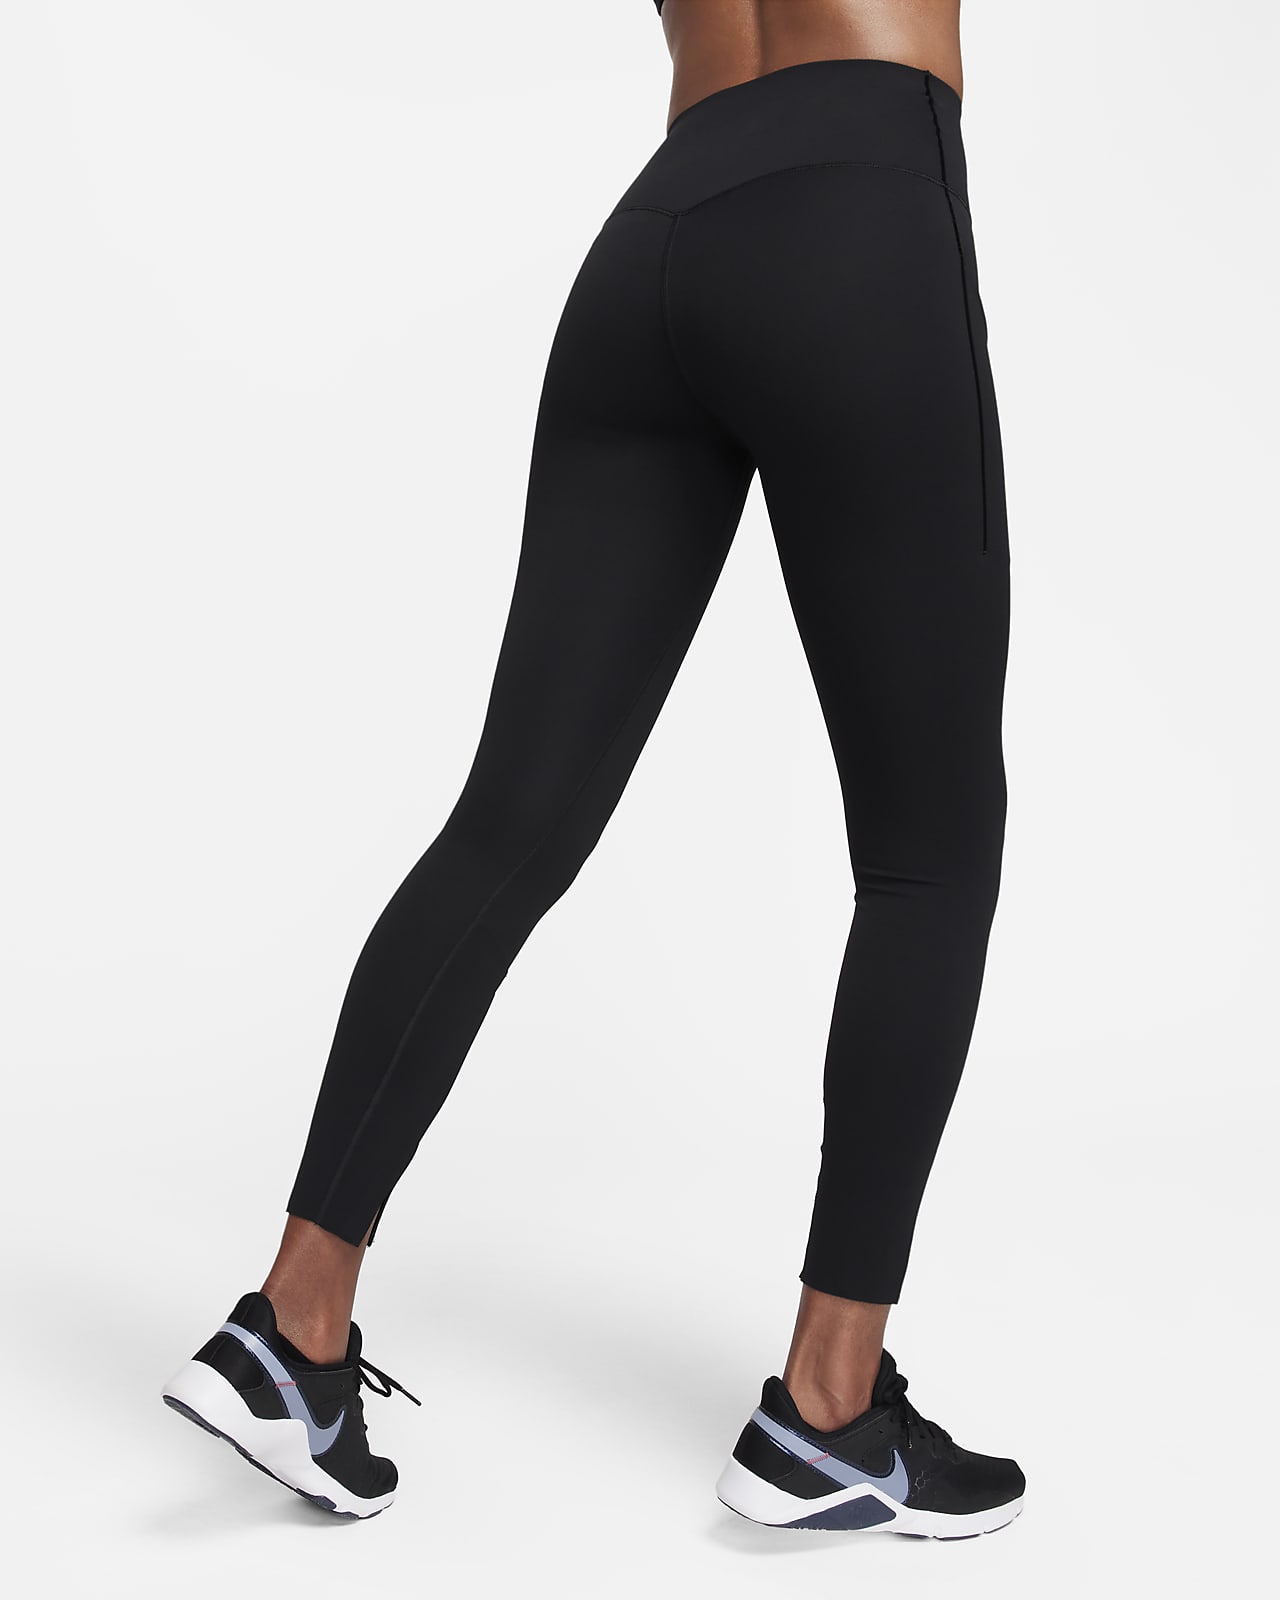 Seamless Tummy Control Sports Tights With Phone Pocket Mesh Insert